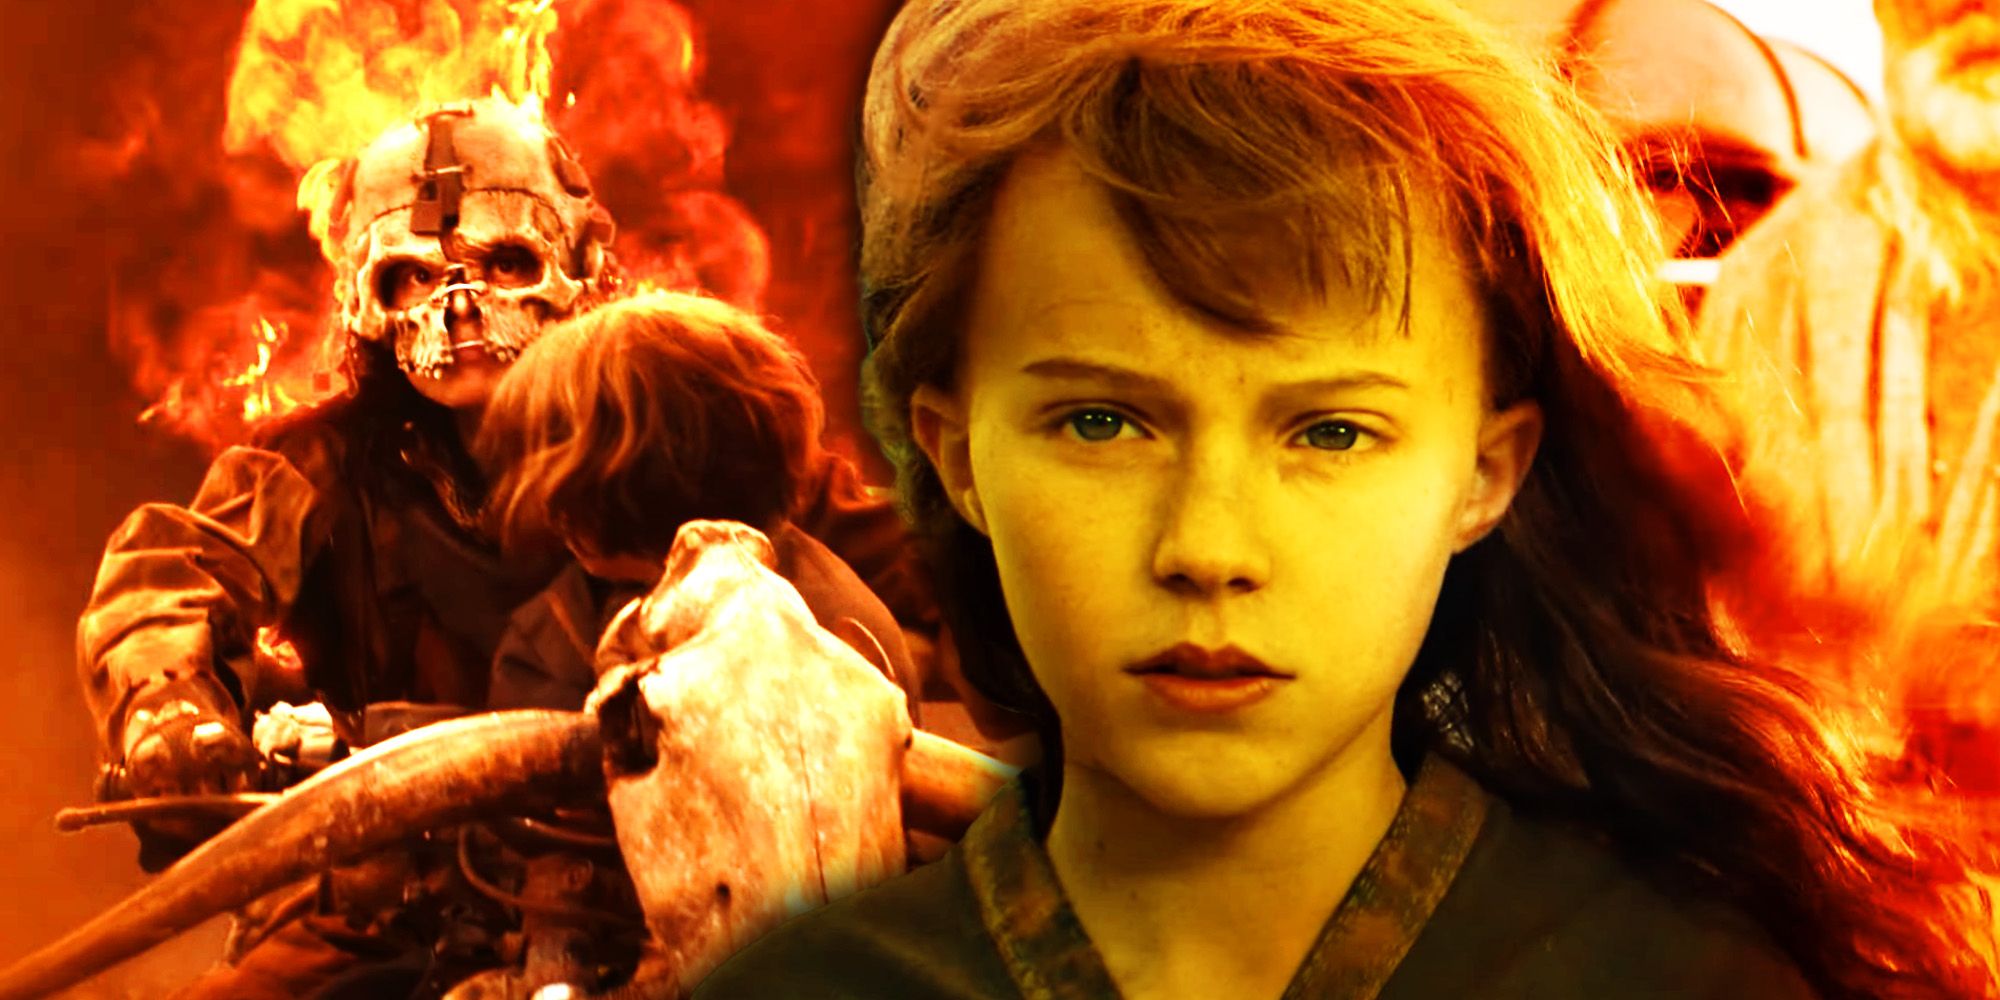 The child version of Furiosa stands in front of characters wearing skulls in Furiosa: A Mad Max Saga.